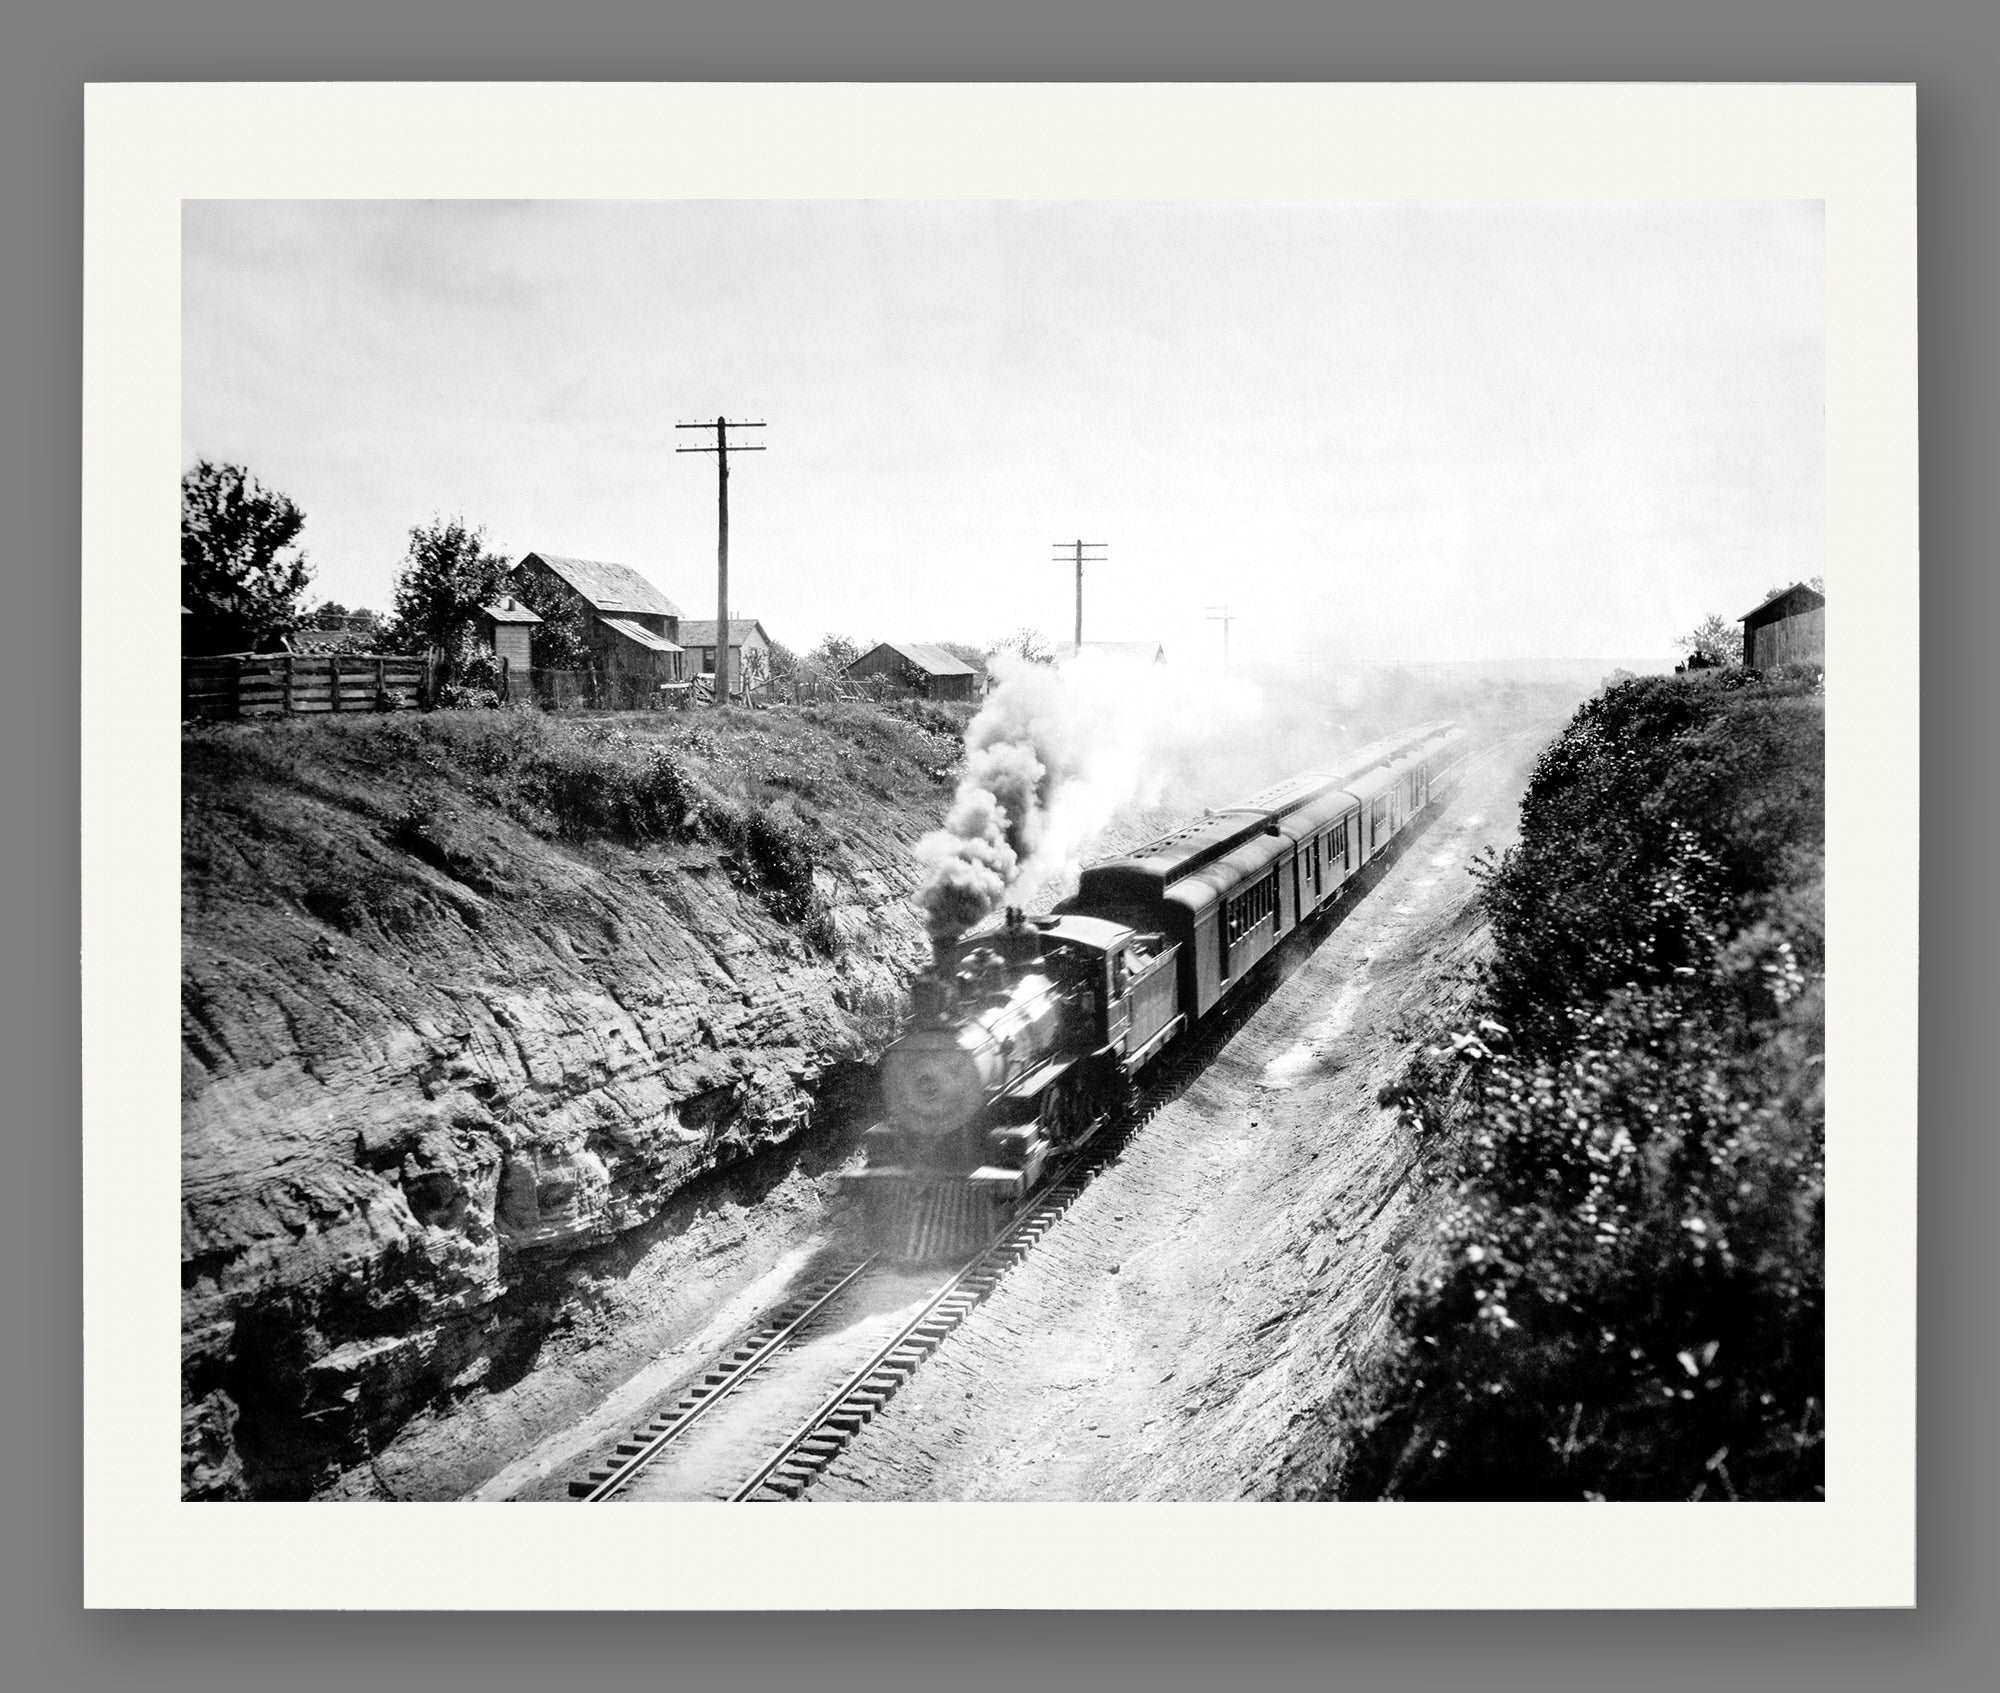 An archival paper print of a vintage photograph of a railroad train